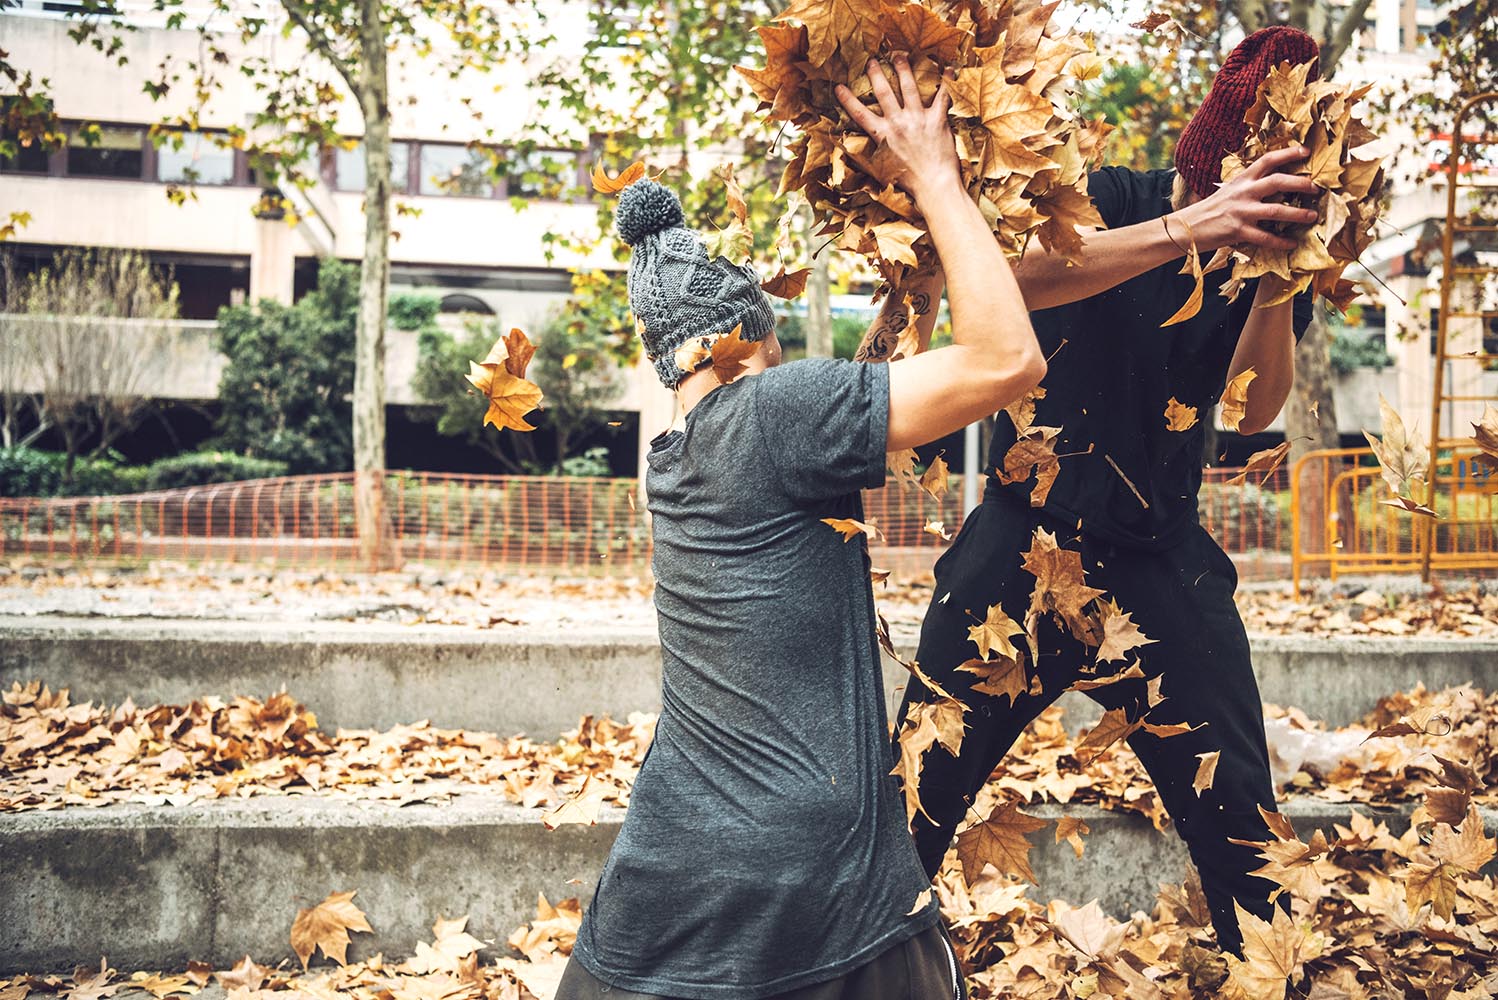 Freerunners playing with leaves in park